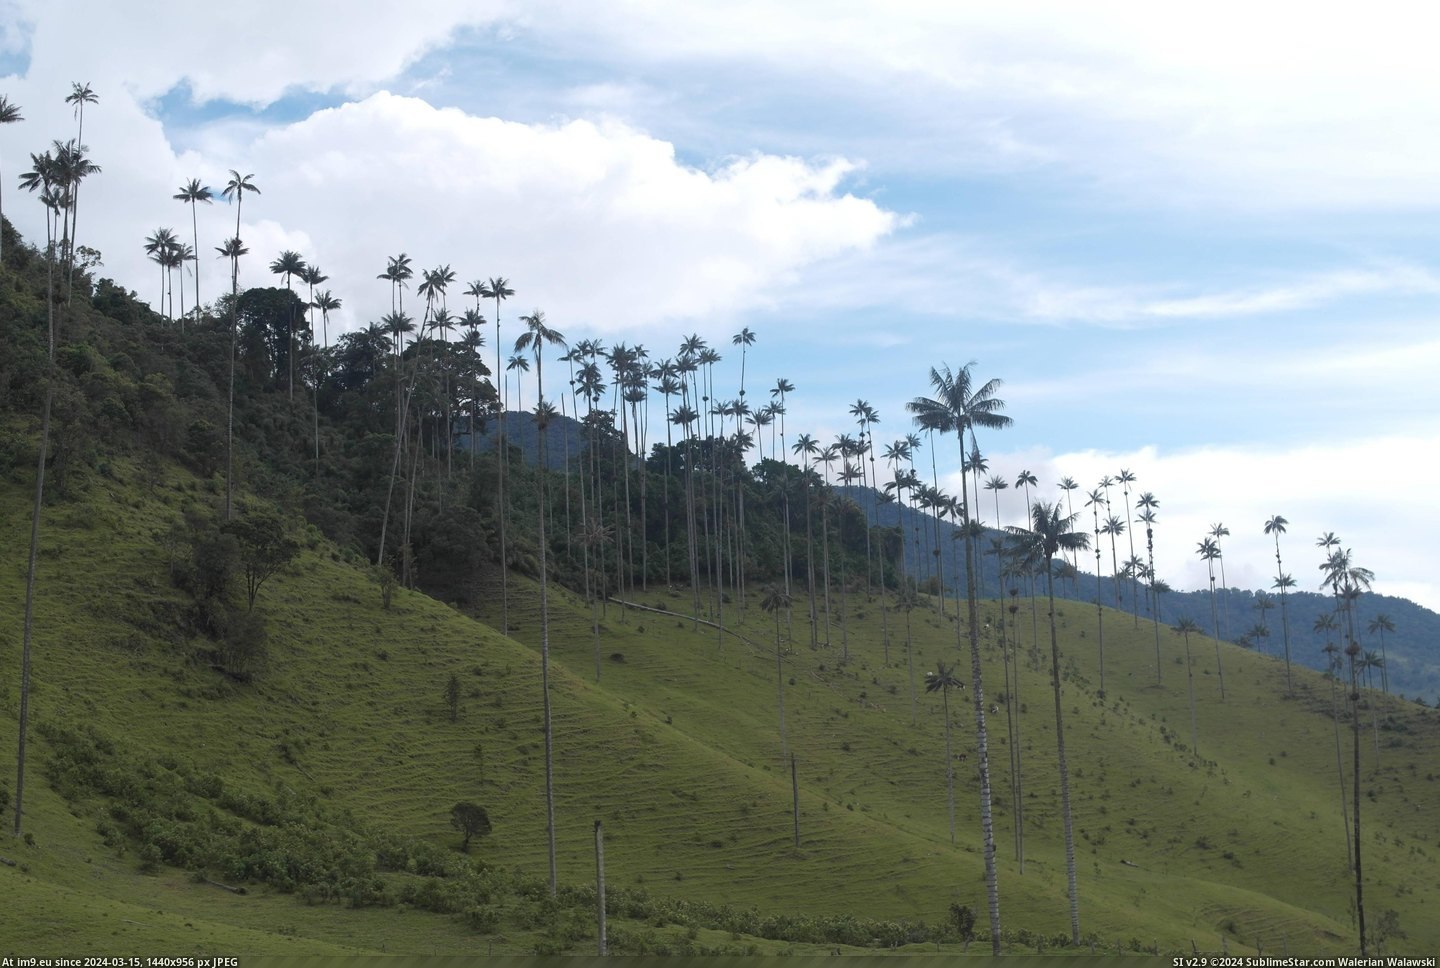 #Picture #Died #Colombia #Camera [Earthporn]  Valle de Cocora, Colombia. Last picture I took before my camera died. [4378x2918] Pic. (Bild von album My r/EARTHPORN favs))